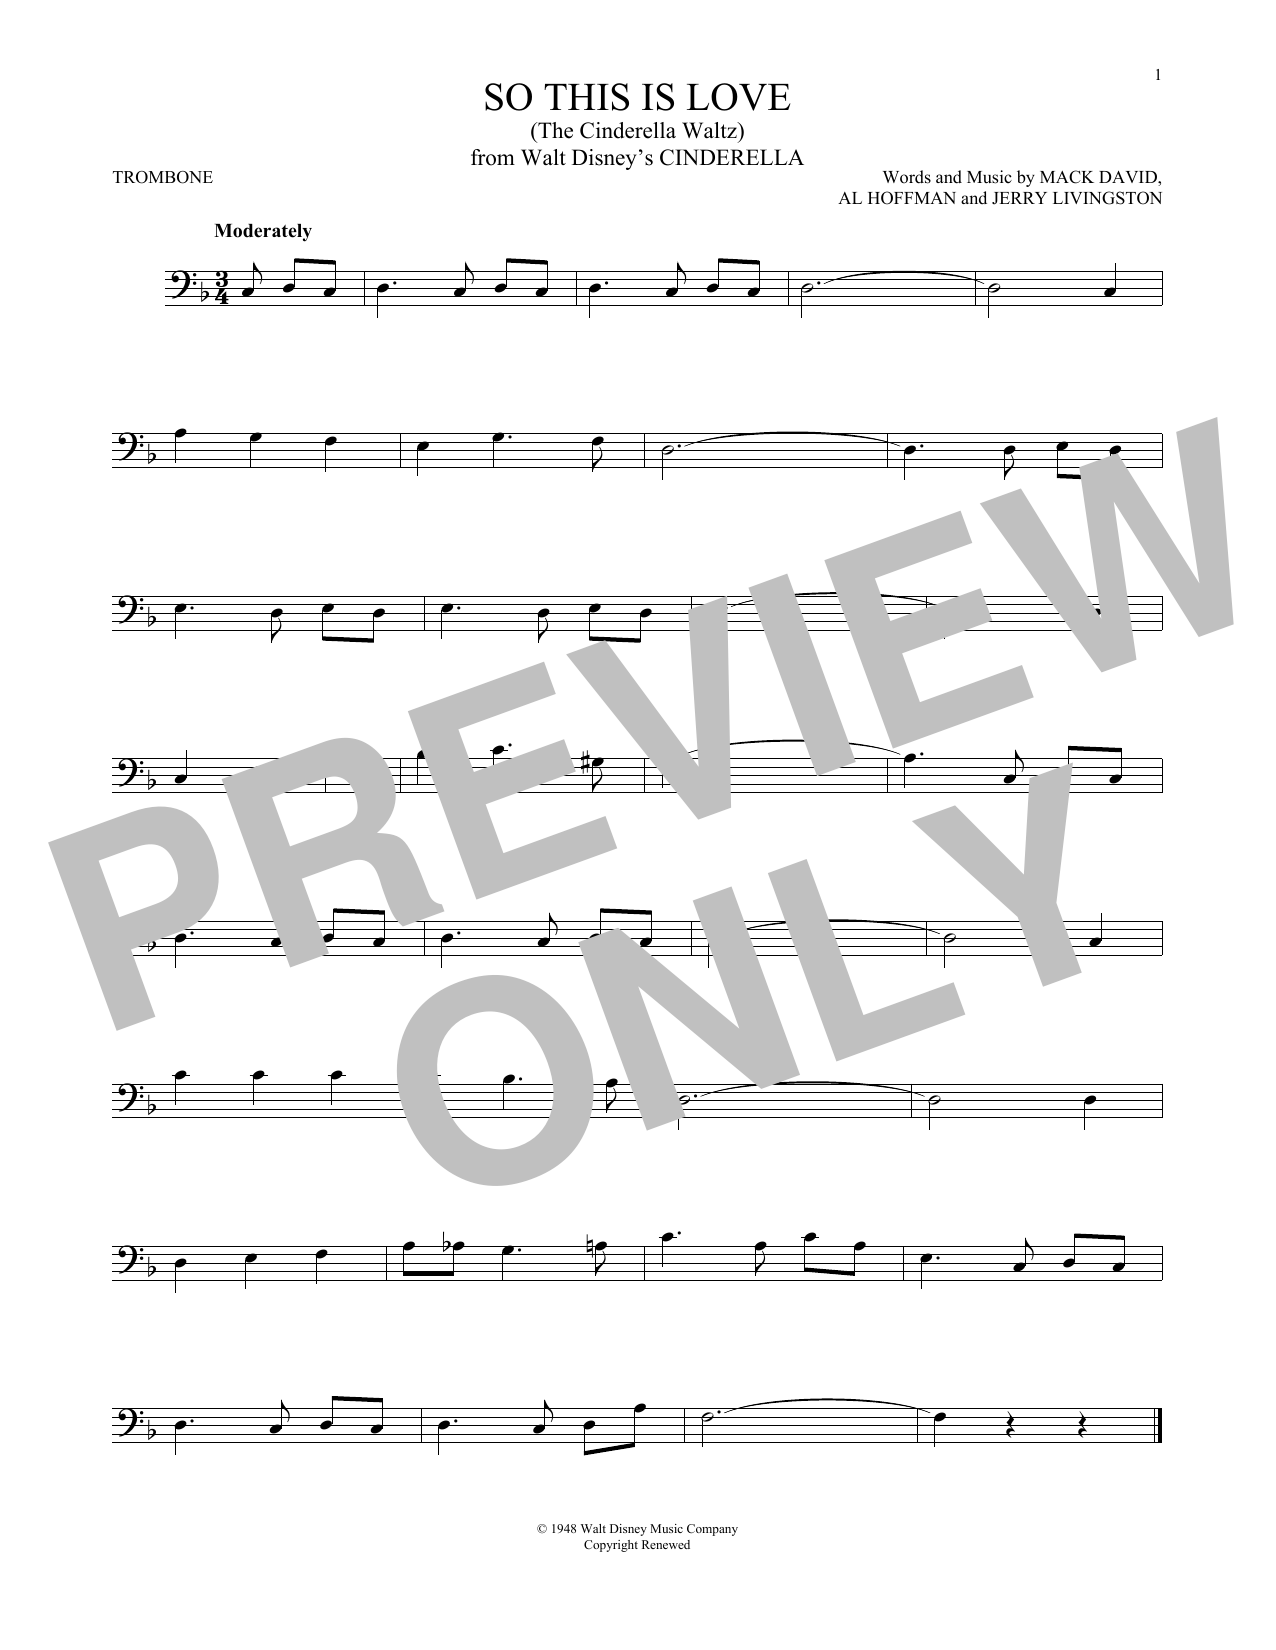 Download Mack David, Al Hoffman and Jerry Liv So This Is Love Sheet Music